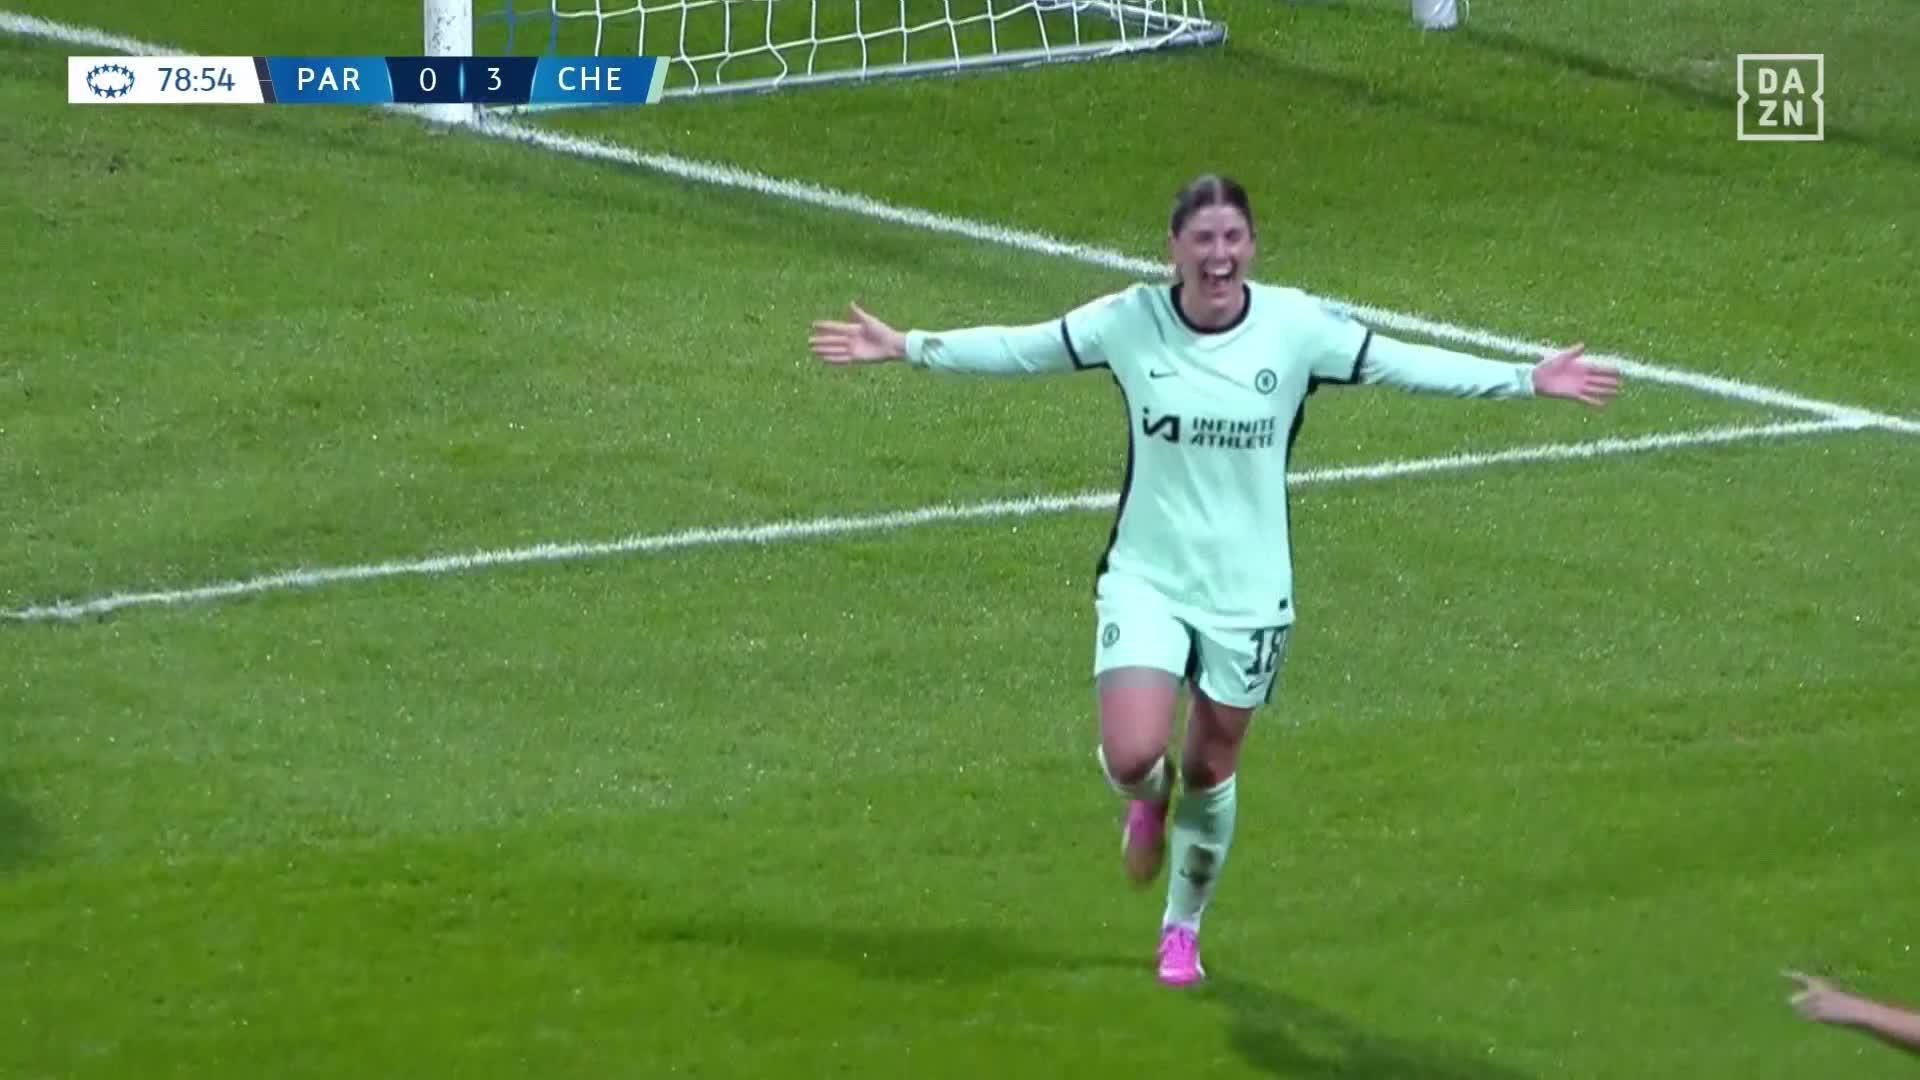 IT'S A FOURTH FOR CHELSEA... Maren Mjelde with the goal. ⚡️Watch the UWCL LIVE for FREE on DAZN 👉  #UWCLonDAZN